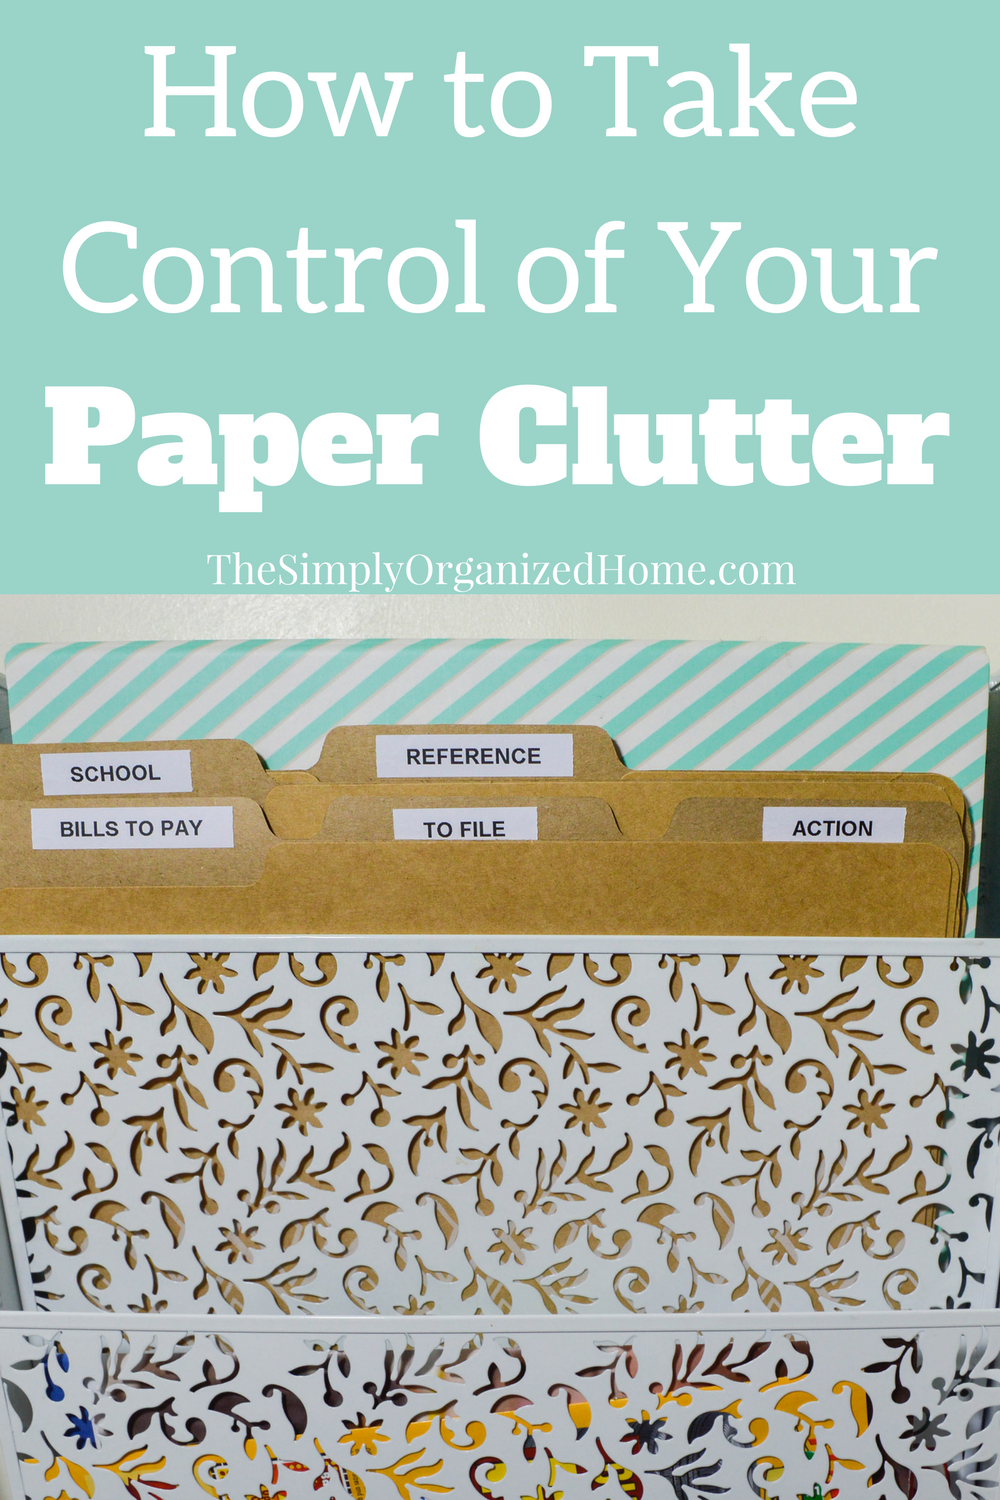 Take Control of Your Paper Clutter! - The Simply Organized Home